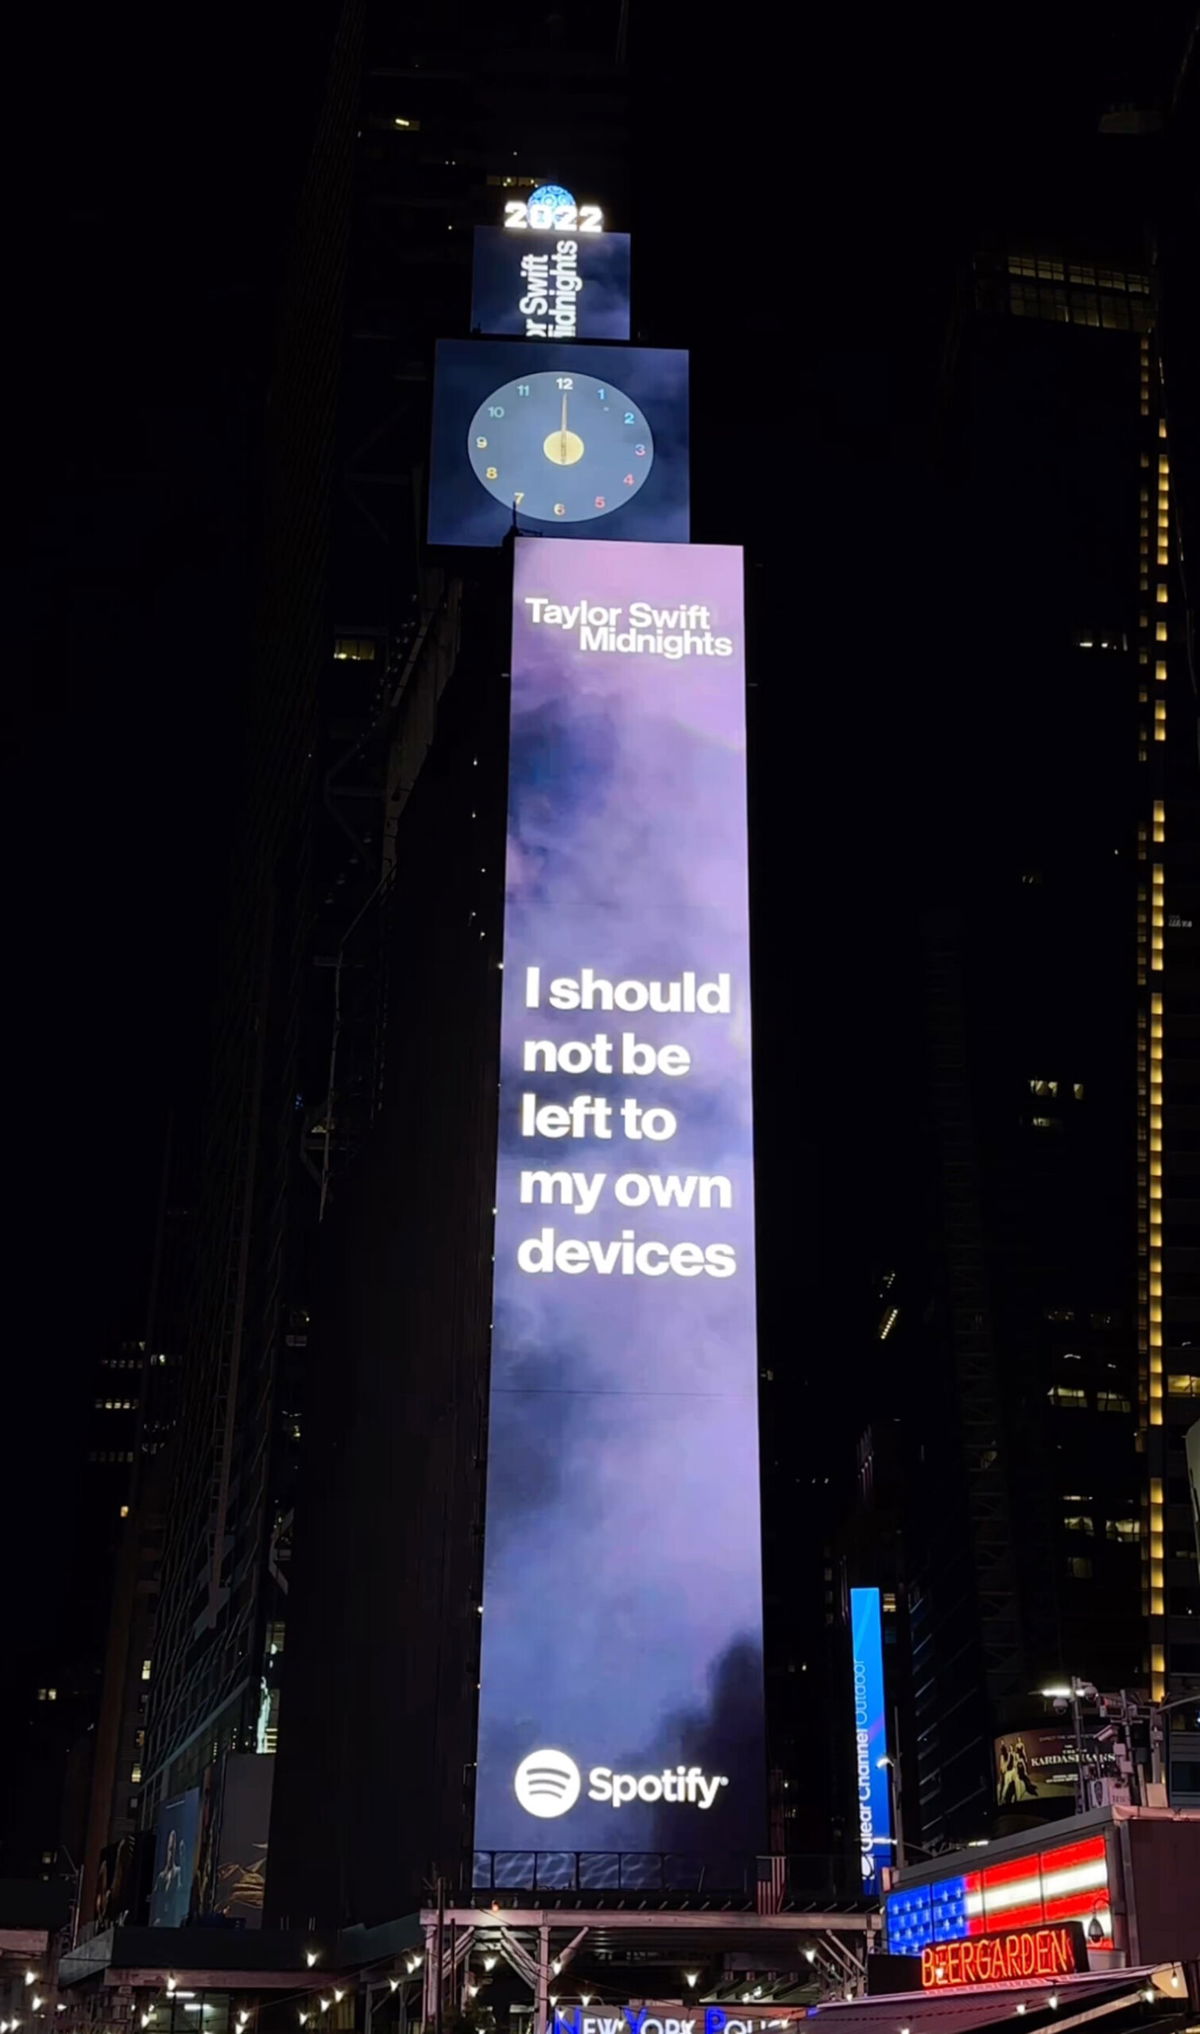 <i>Spotify/Instagram</i><br/>Taylor Swift's new lyrics got a Time Square reveal. Spotify took out a massive billboard in Times Square on Sunday to share lyrics from her album 